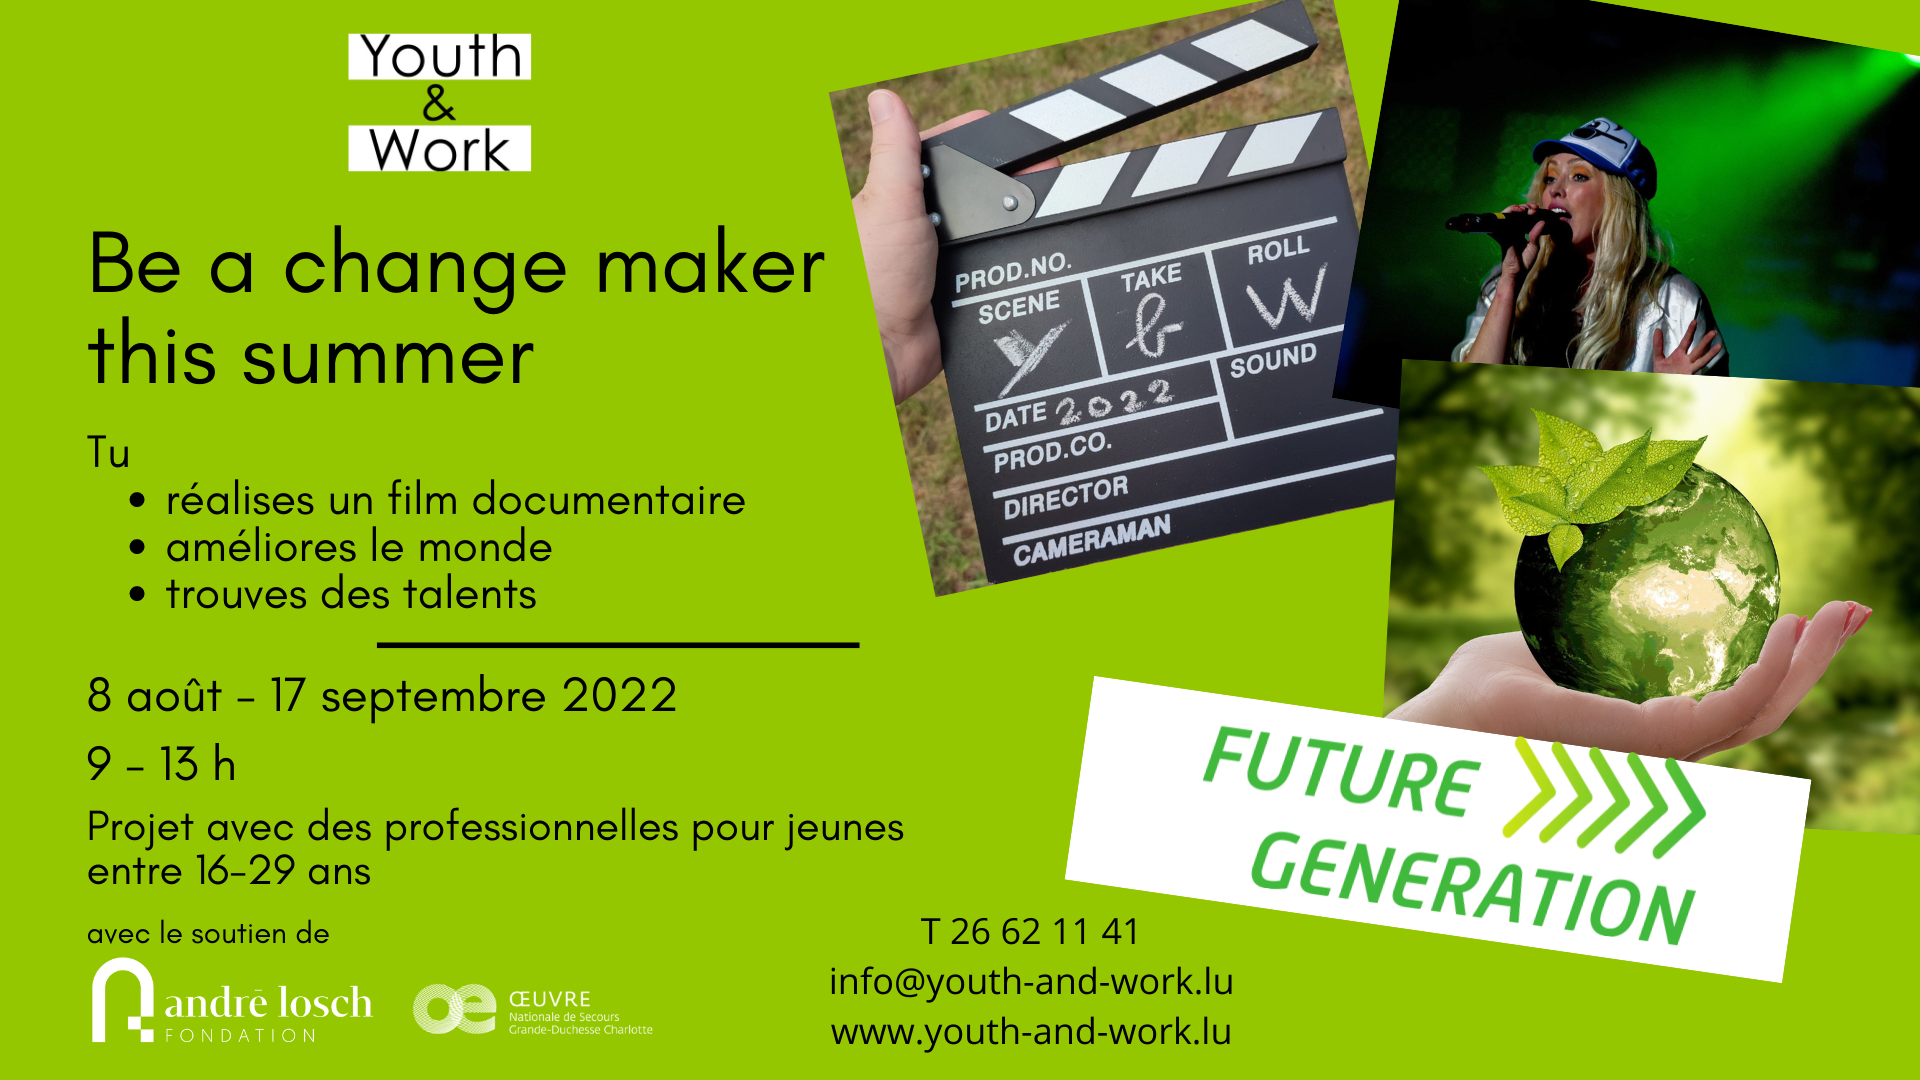 Future Generation - Youth & Work